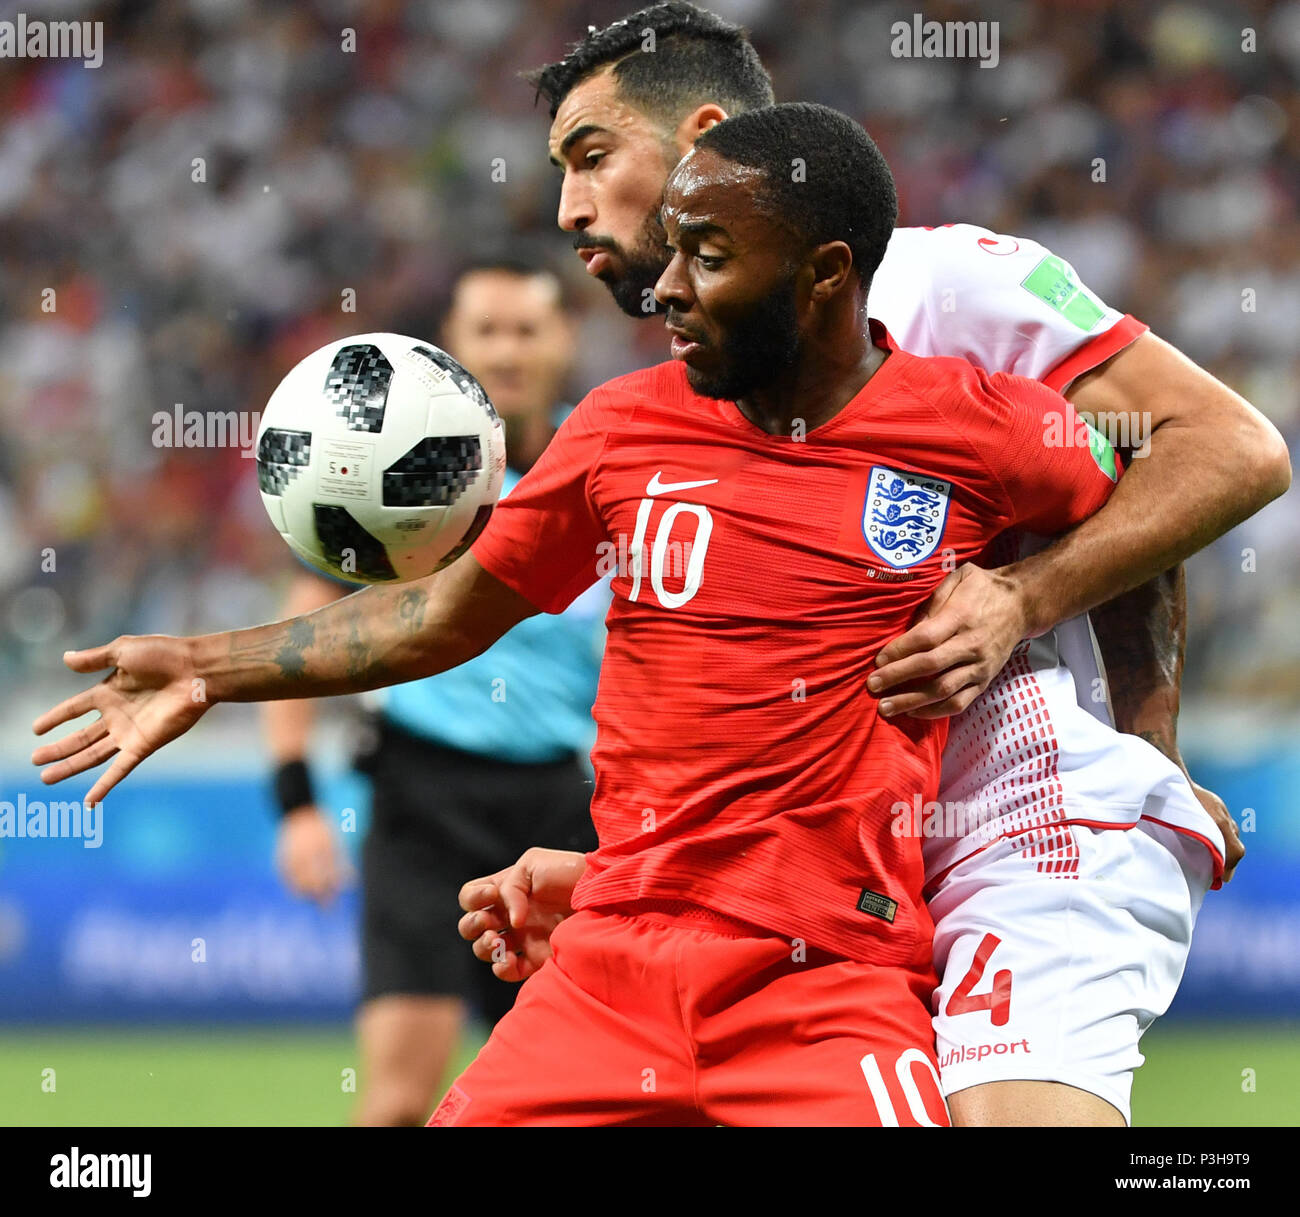 Volgograd, Russia. 18th June, 2018. Raheem Sterling (front) of England vies with Yassine Meriah of Tunisia during a group G match between Tunisia and England at the 2018 FIFA World Cup in Volgograd, Russia, June 18, 2018. Credit: Liu Dawei/Xinhua/Alamy Live News Stock Photo